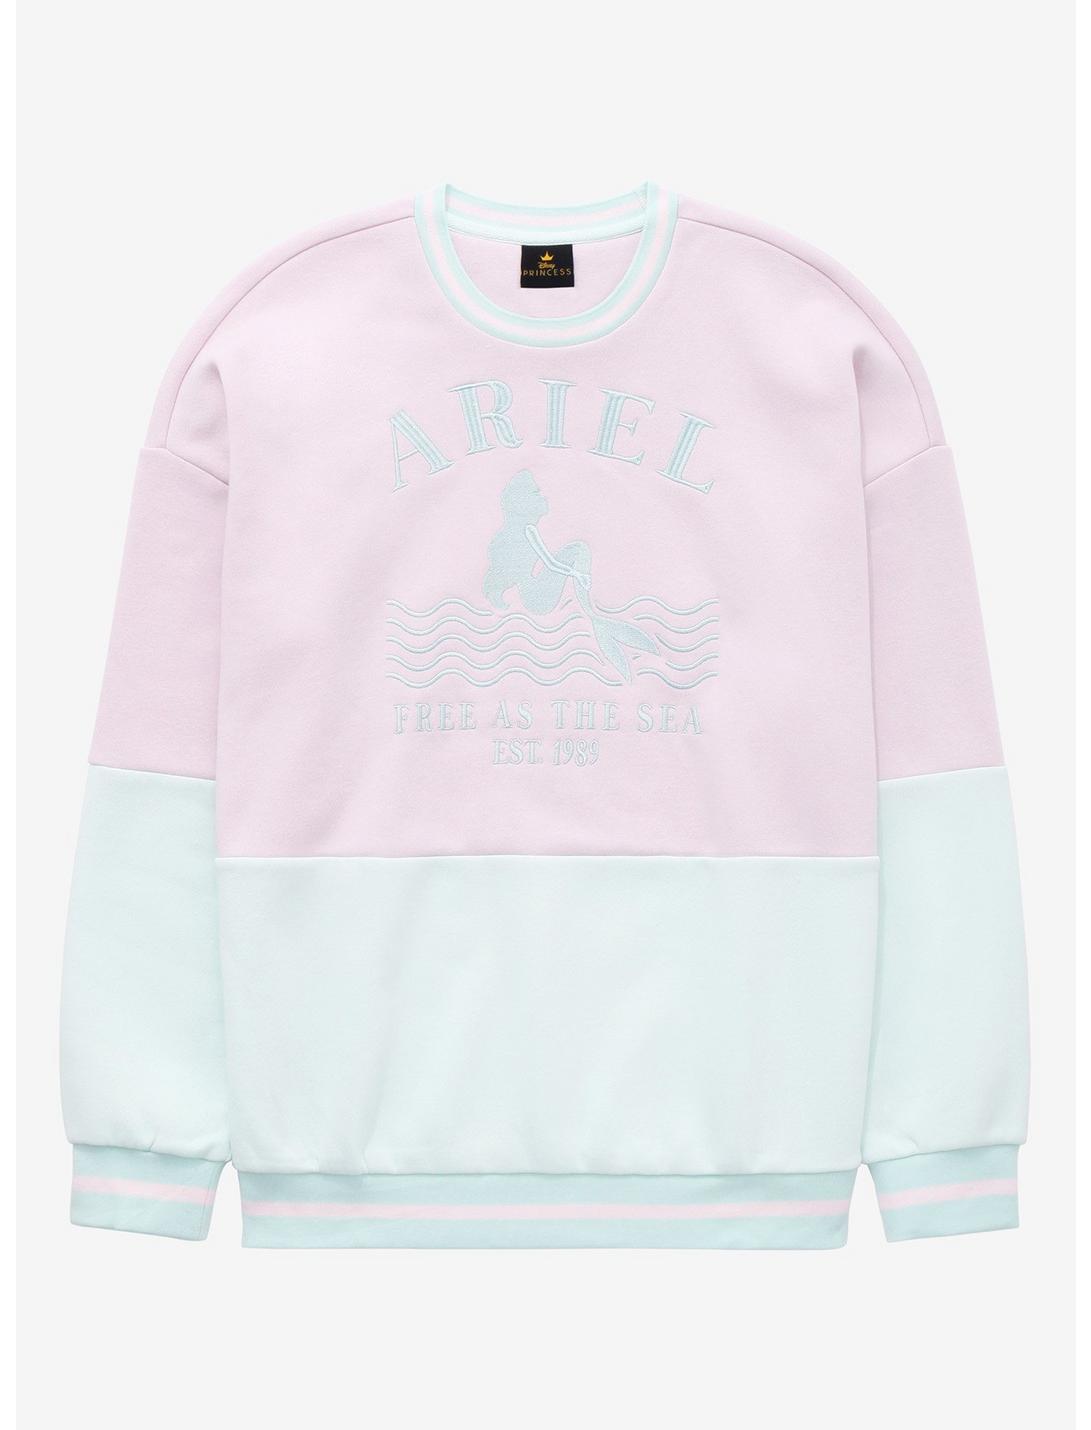 Disney The Little Mermaid Ariel Free as the Sea Crewneck - BoxLunch Exclusive, LIGHT GREEN, hi-res